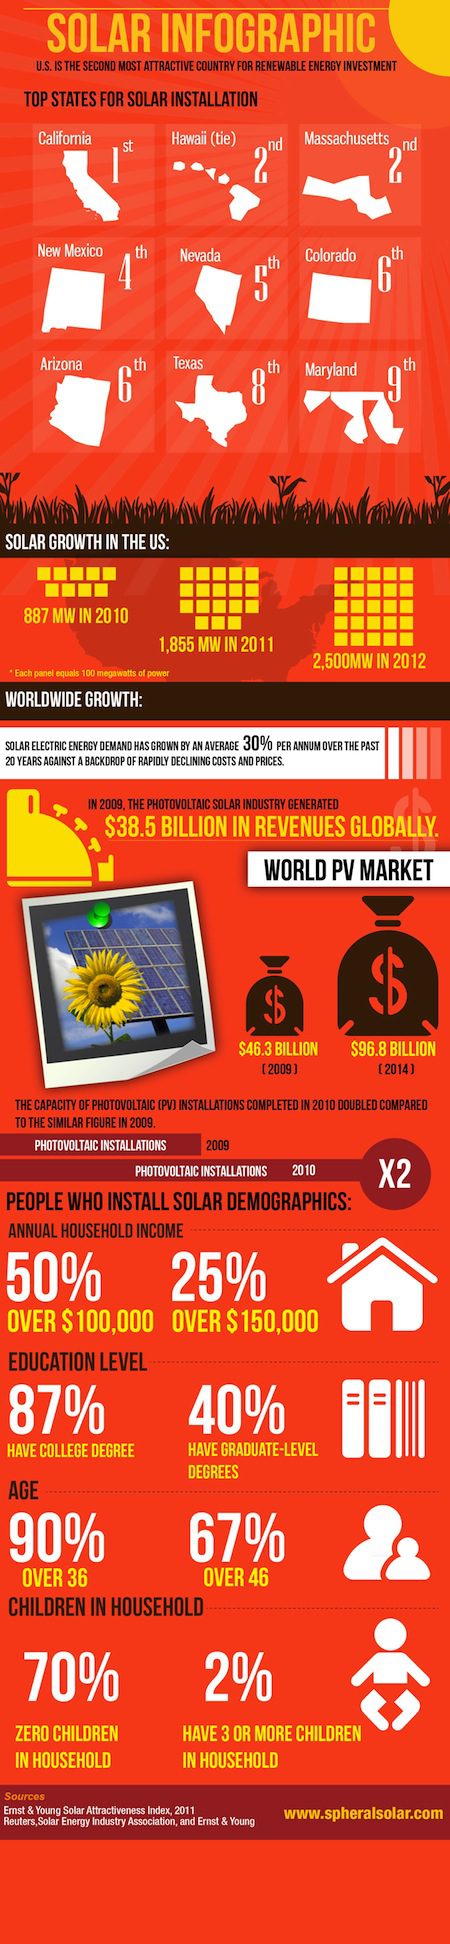 Solar Power in the US